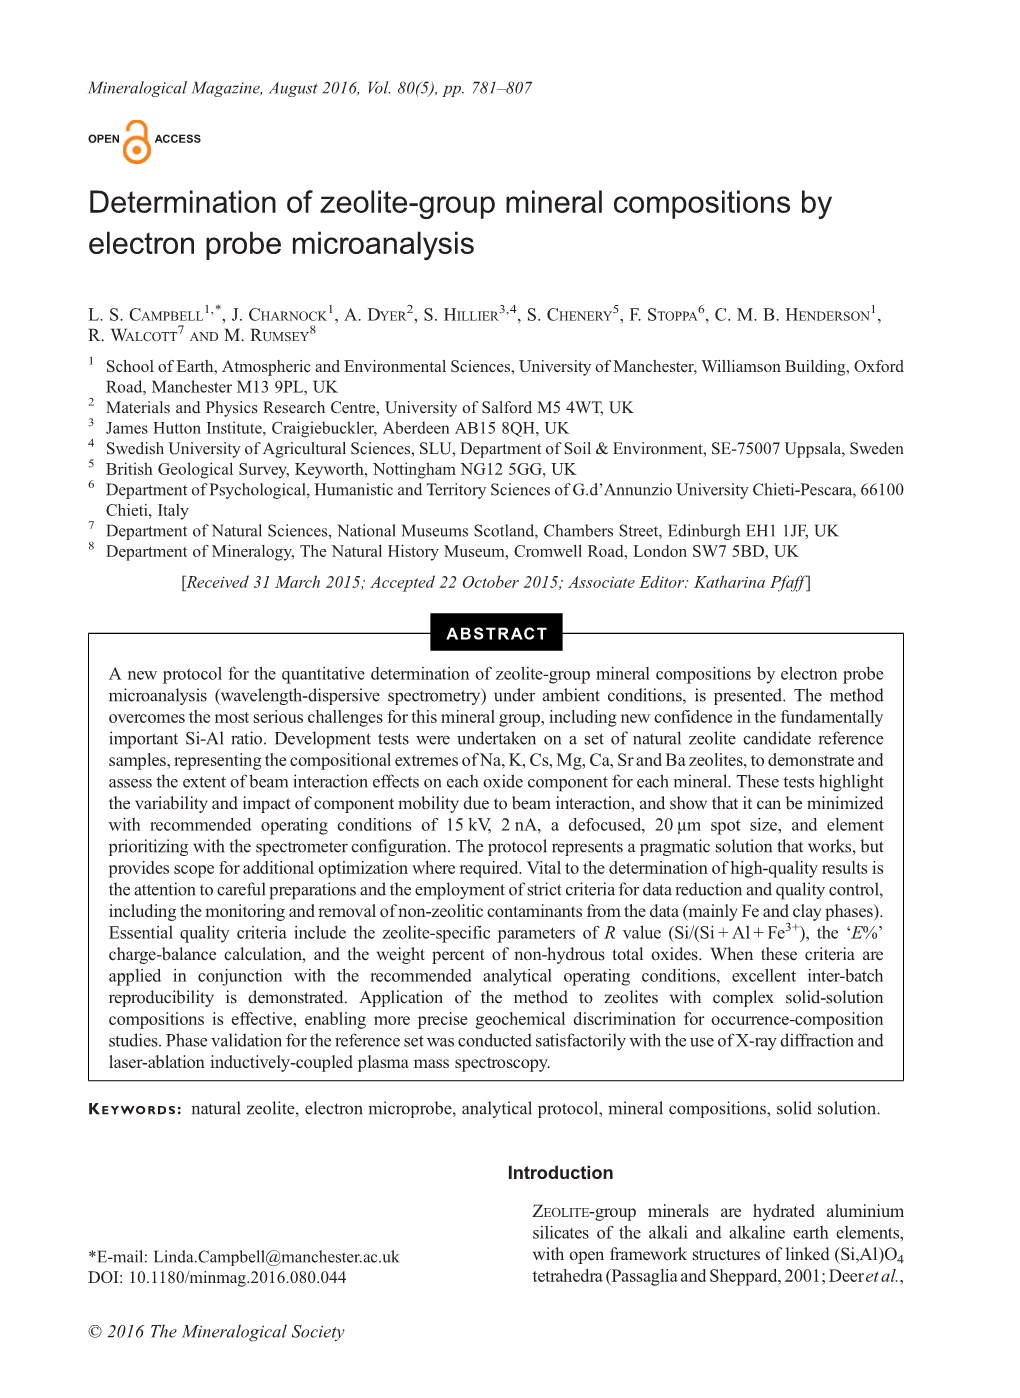 Determination of Zeolite-Group Mineral Compositions by Electron Probe Microanalysis